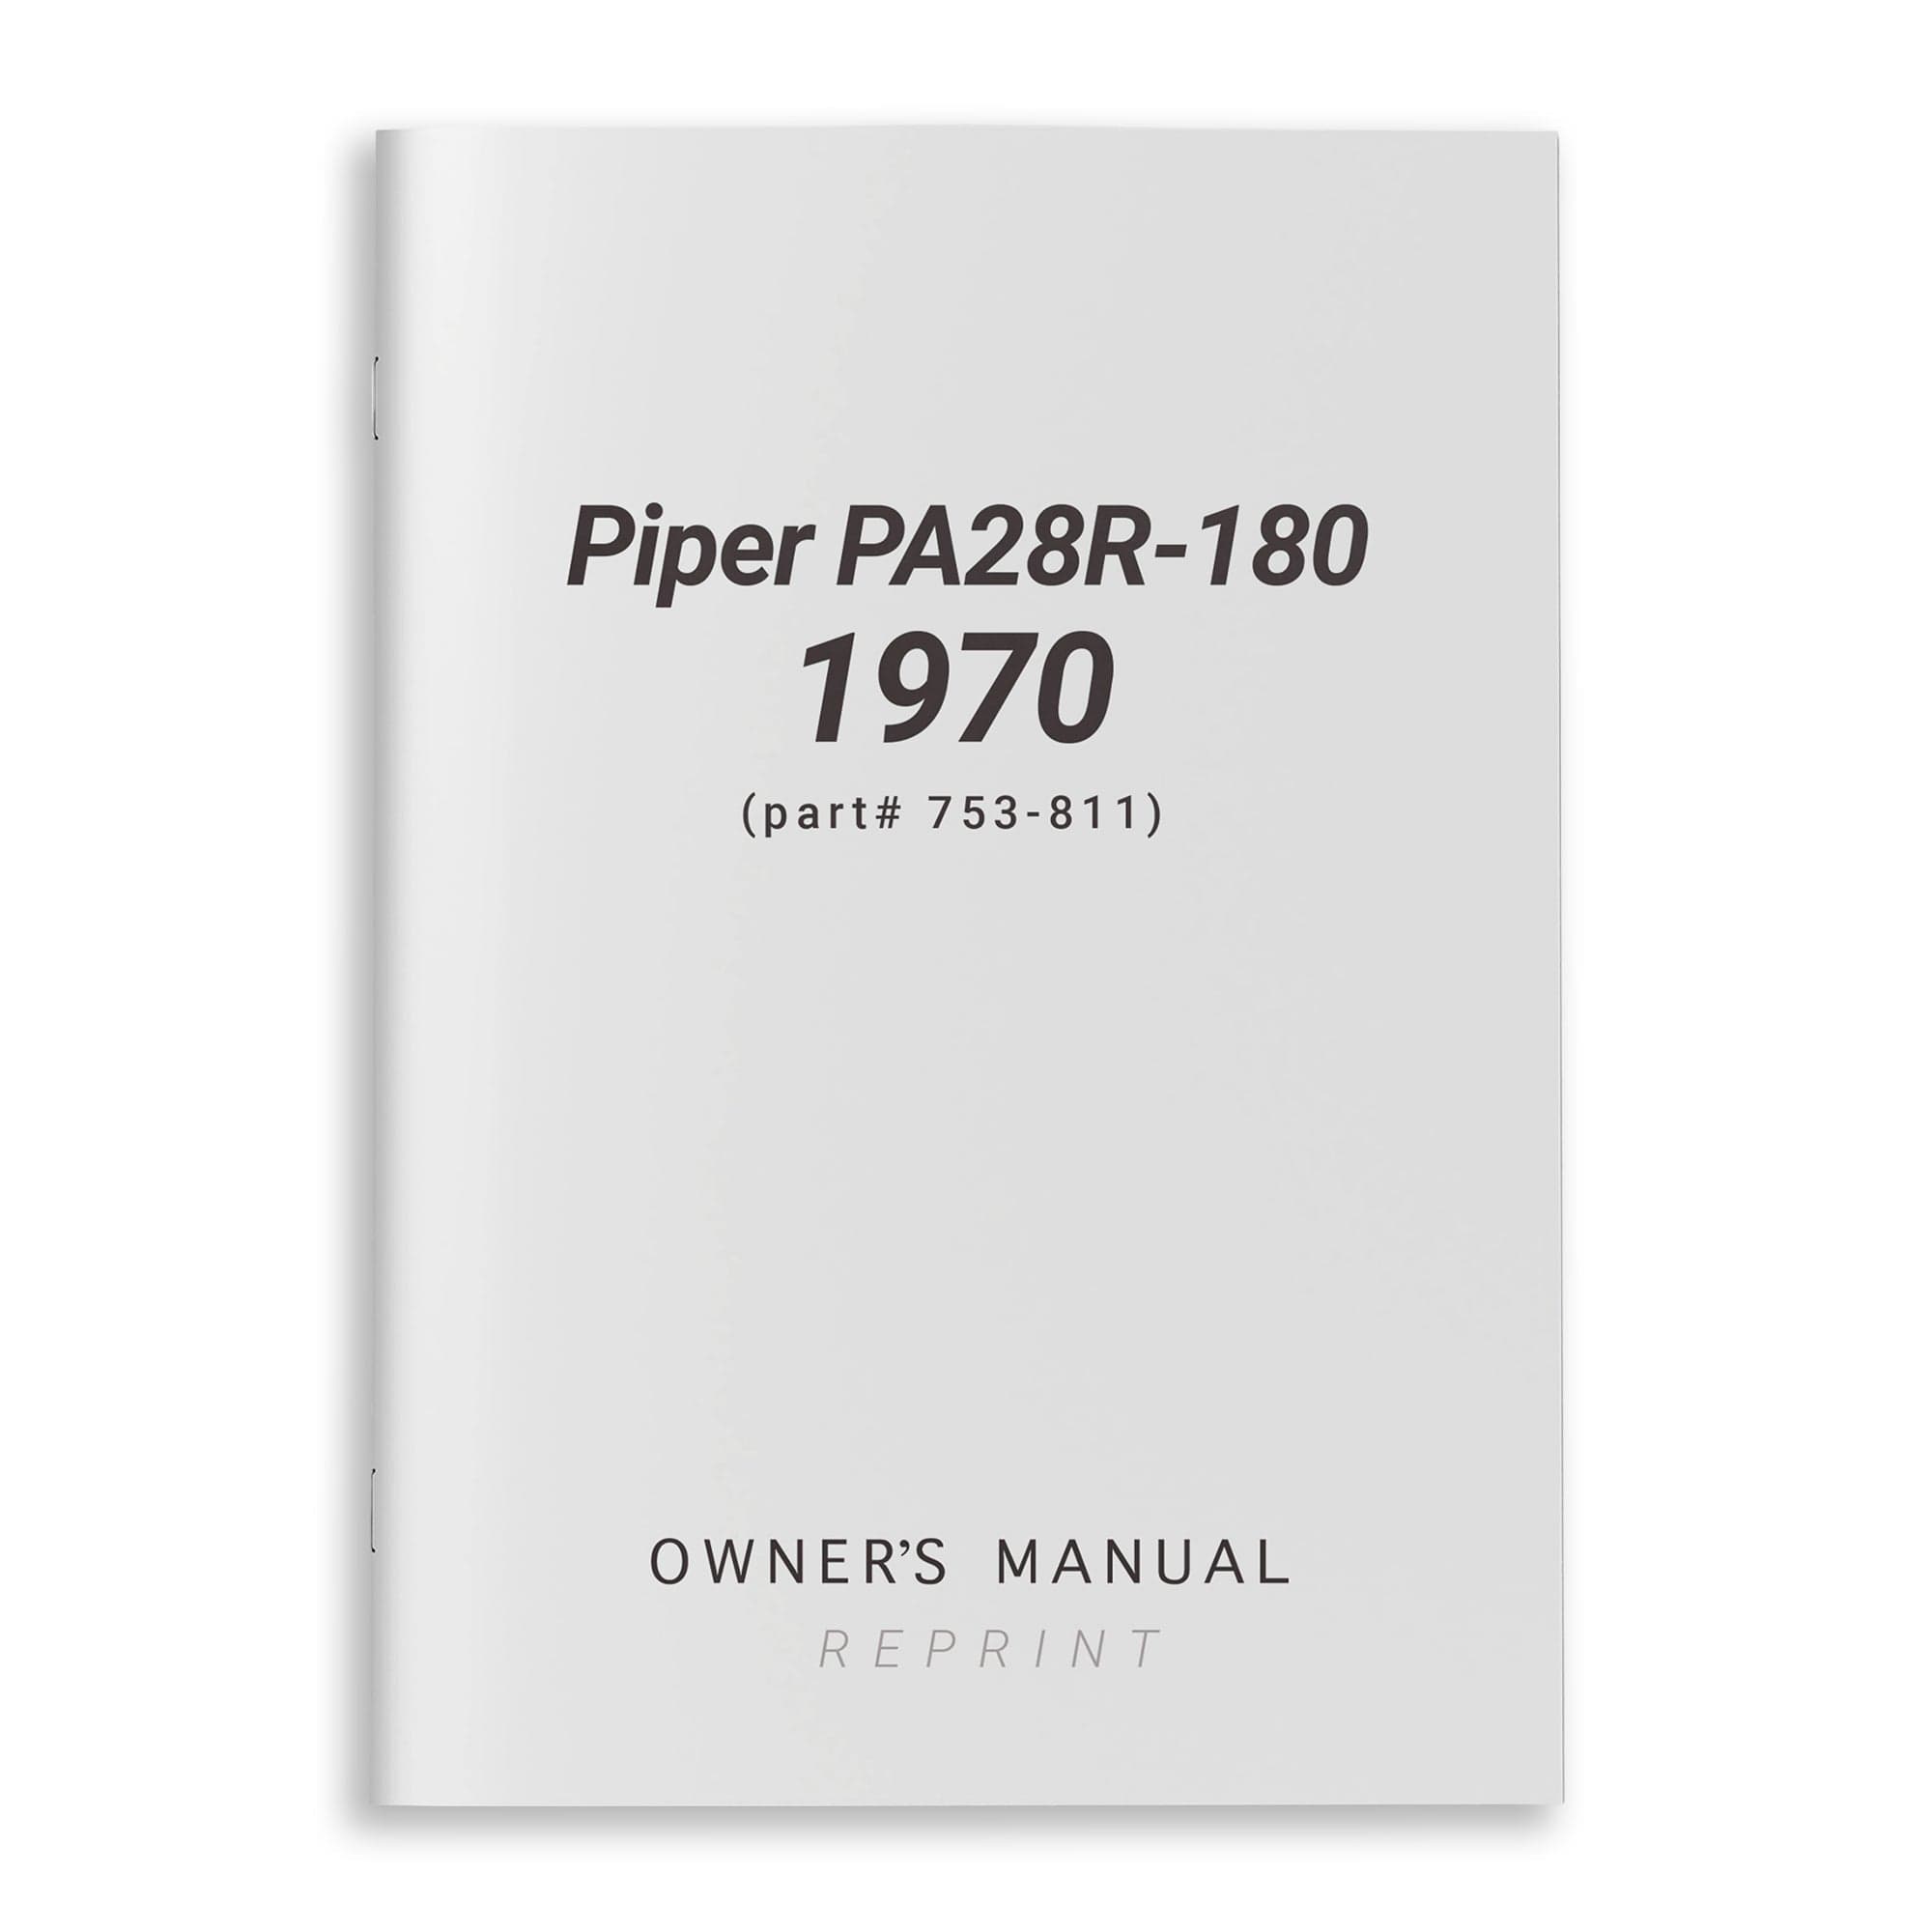 Piper PA28R-180 1970 Owner's Manual (part# 753-811)